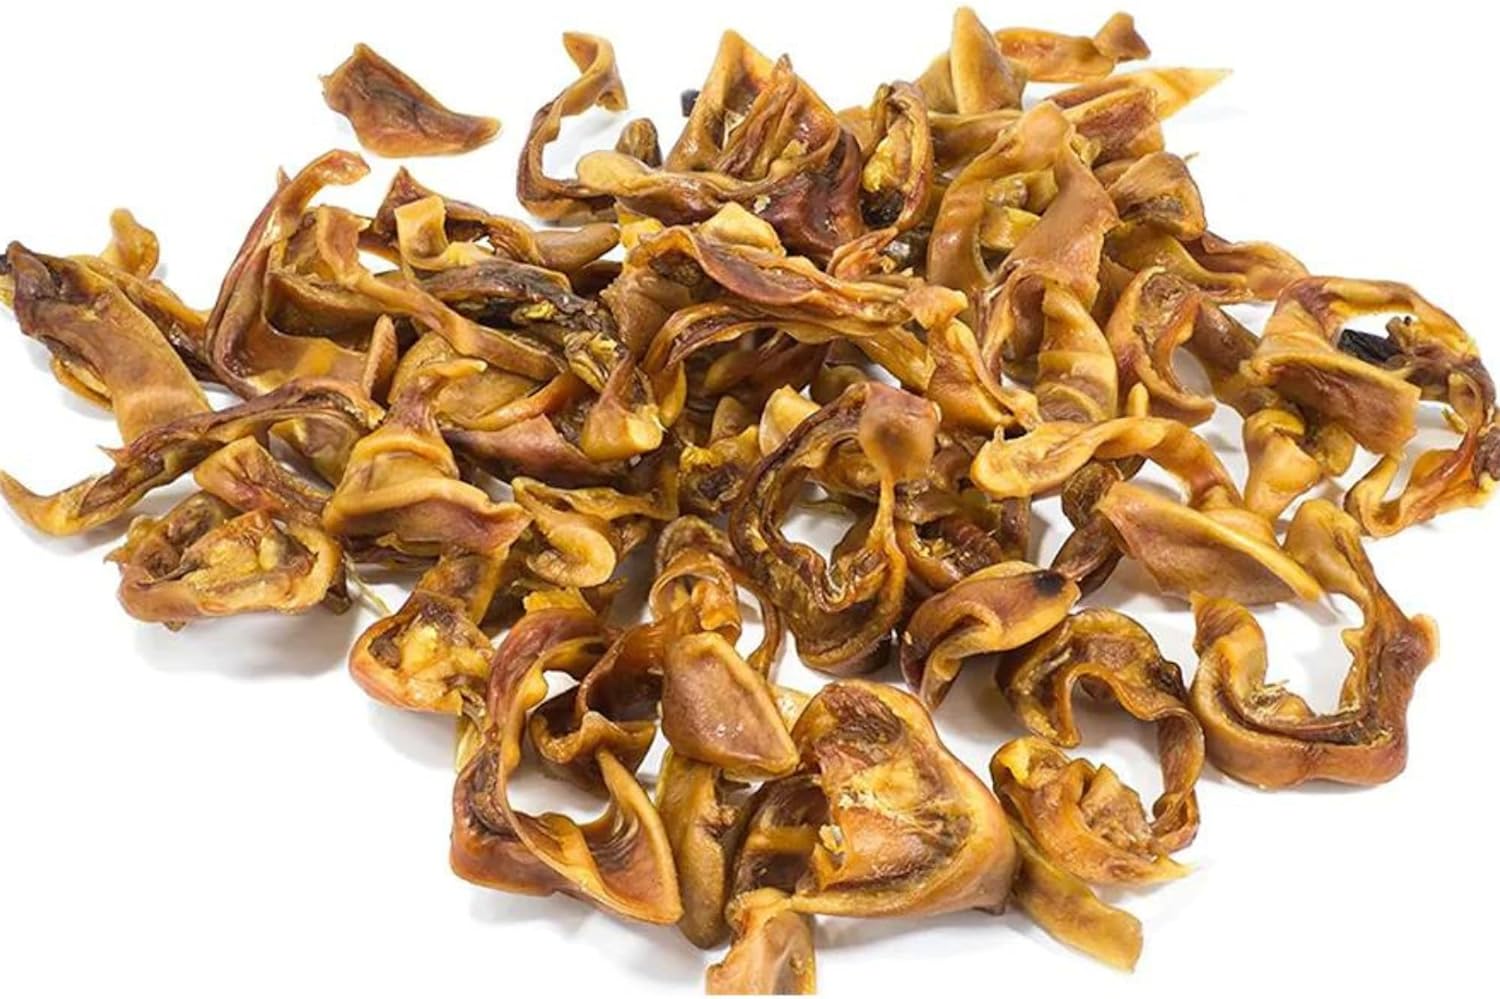 K9warehouse® - Pig Ears Strips for Dogs - One Pound Natural Pigs Ears Slices - Dog Treats for Puppies, Small, Medium and Large Dogs - Healthy, Tasty Pig Ear Made for Dogs Chew Treat